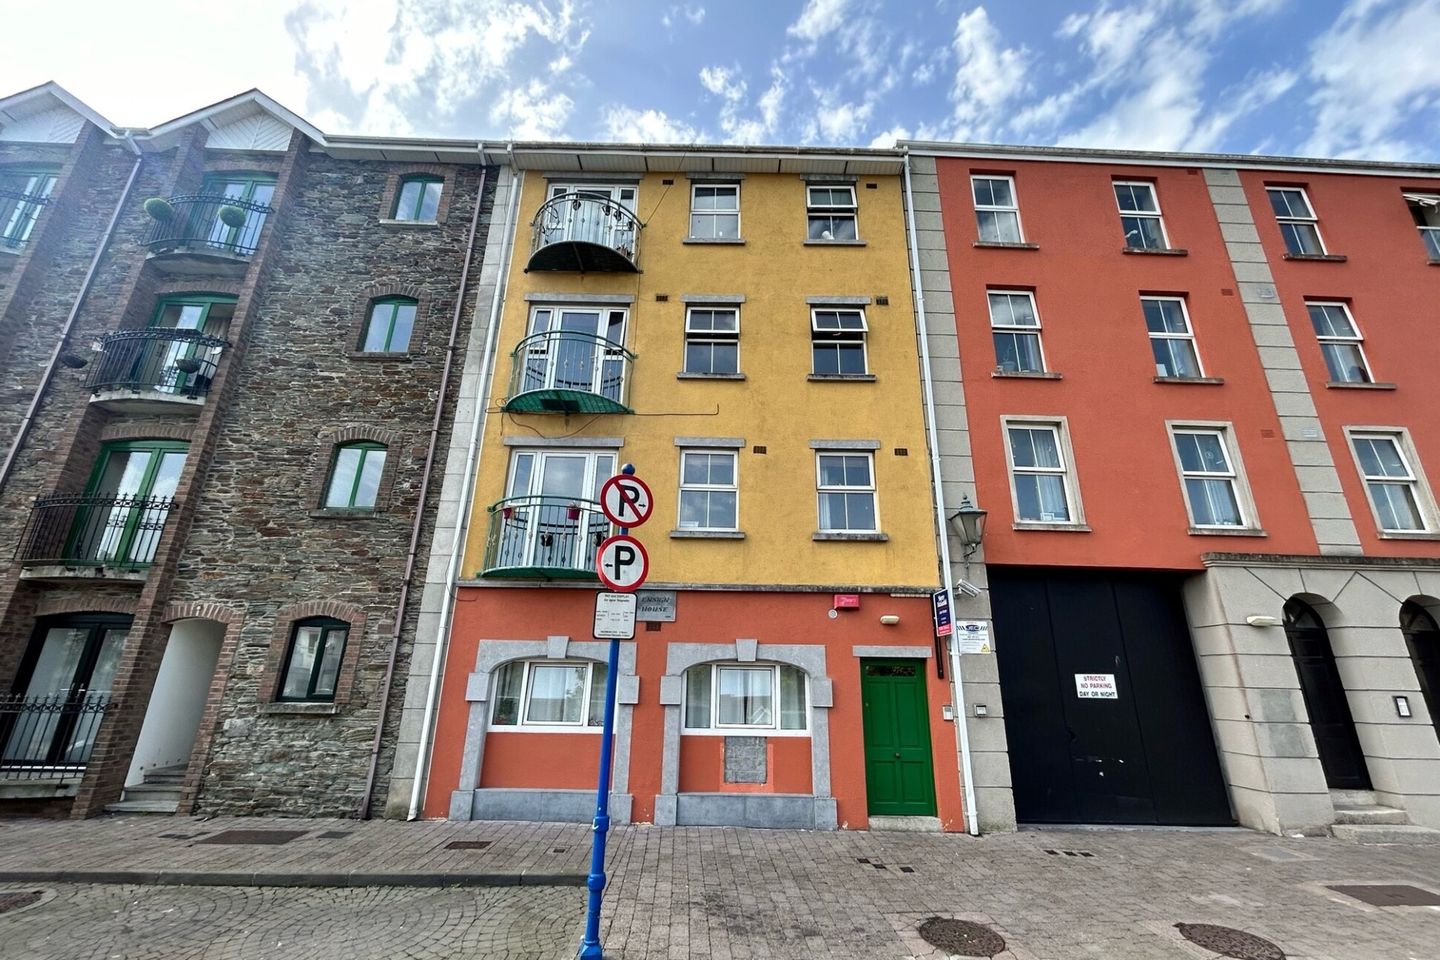 Apt. 4 Ensign House, Georges Quay, Waterford, Waterford City, Co. Waterford, X91HR23